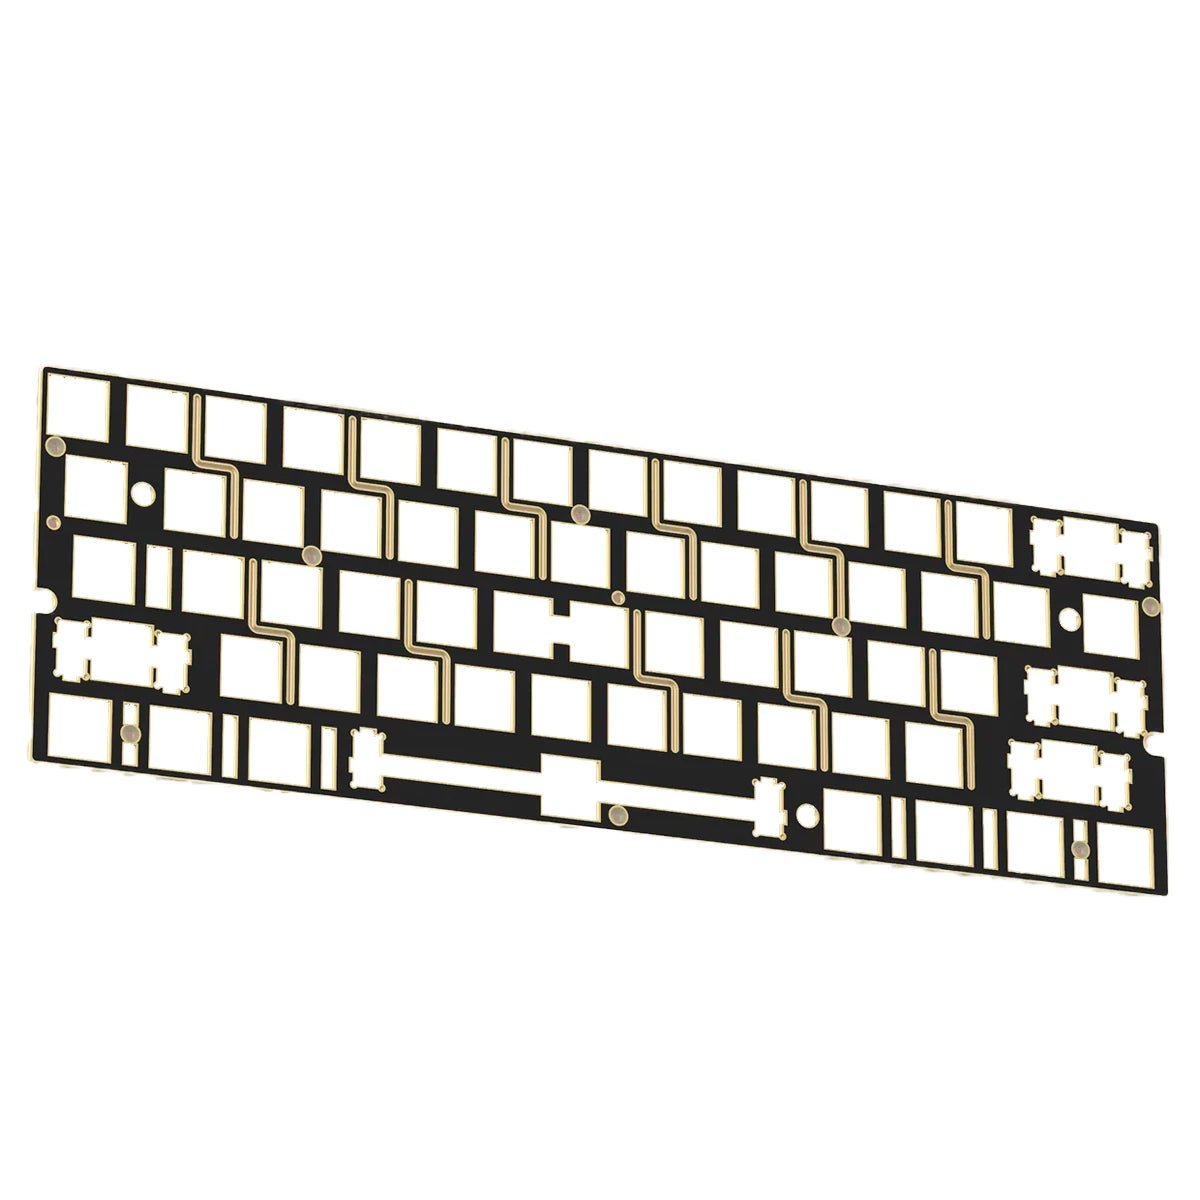 KBDfans Wooting60 HE Compatible Plates